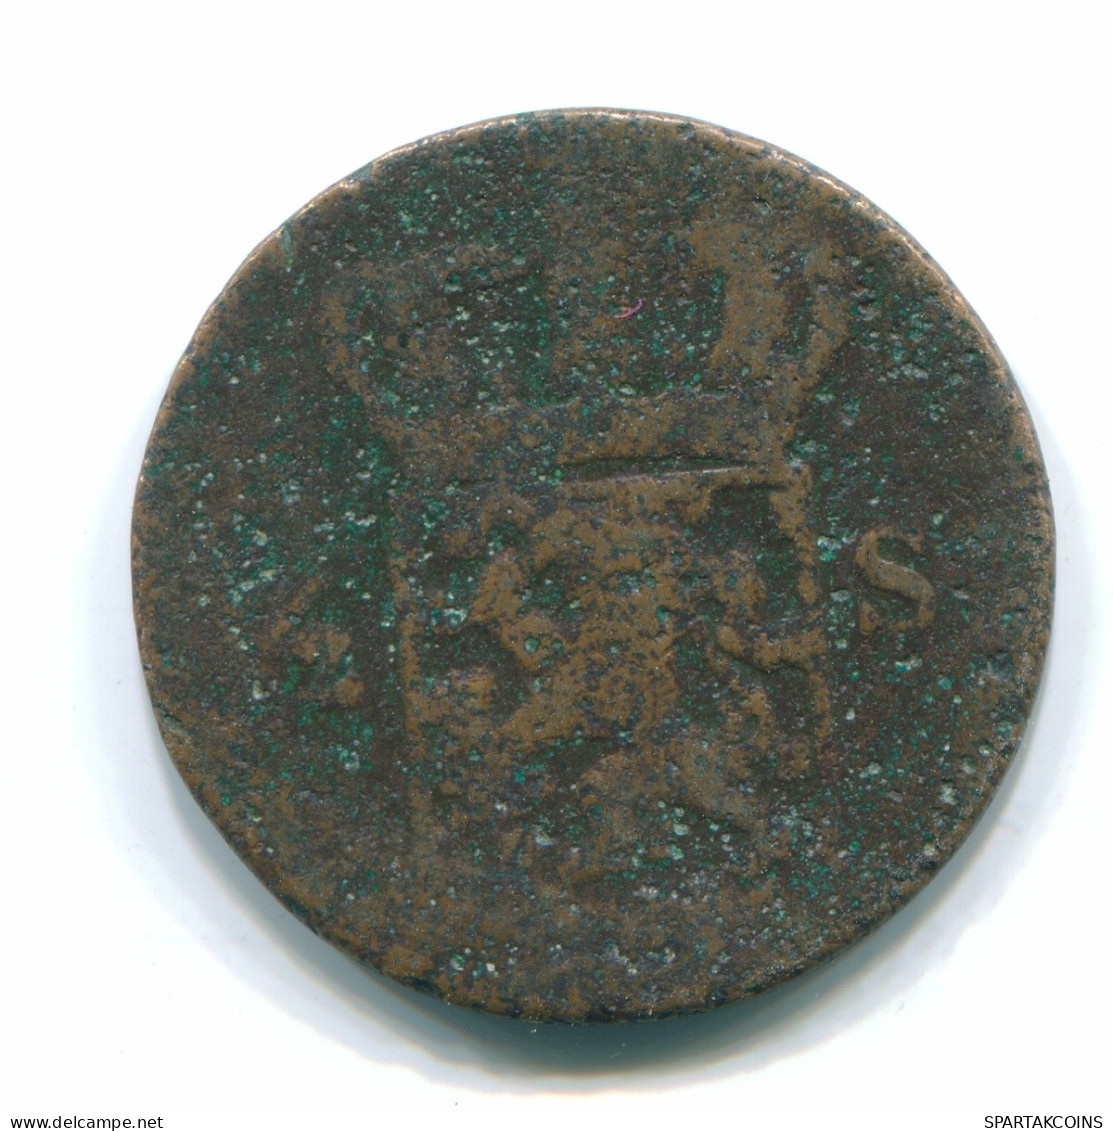 1/2 STUIVER 1823 SUMATRA NETHERLANDS EAST INDIES Colonial Coin #S11826.U.A - Dutch East Indies